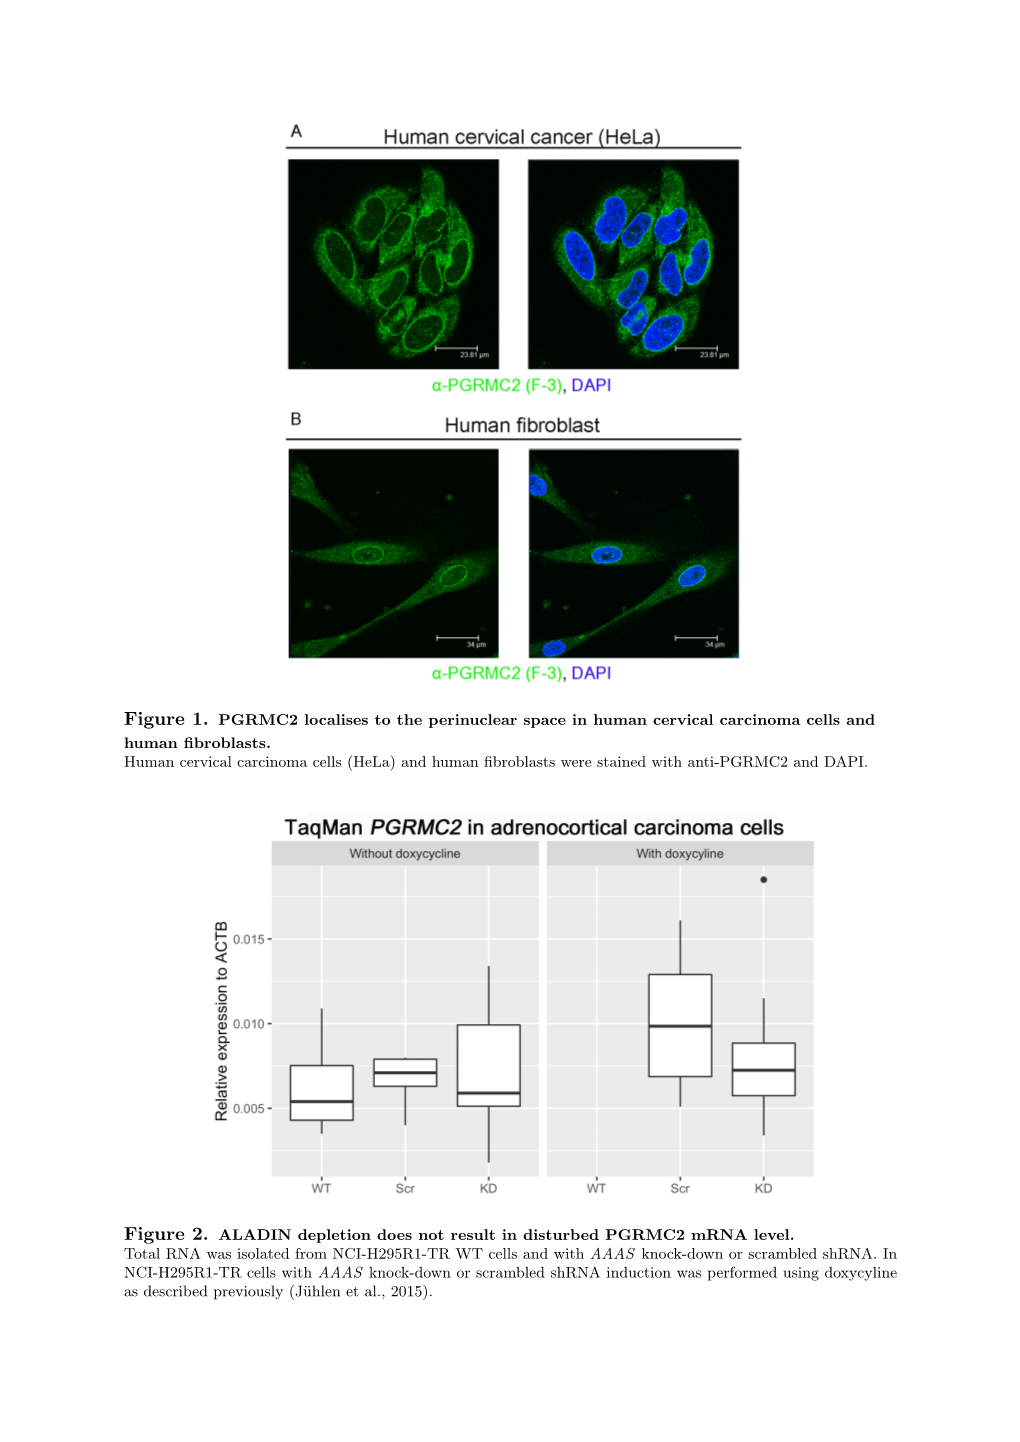 Figure 1. PGRMC2 Localises to the Perinuclear Space in Human Cervical Carcinoma Cells and Human ﬁbroblasts